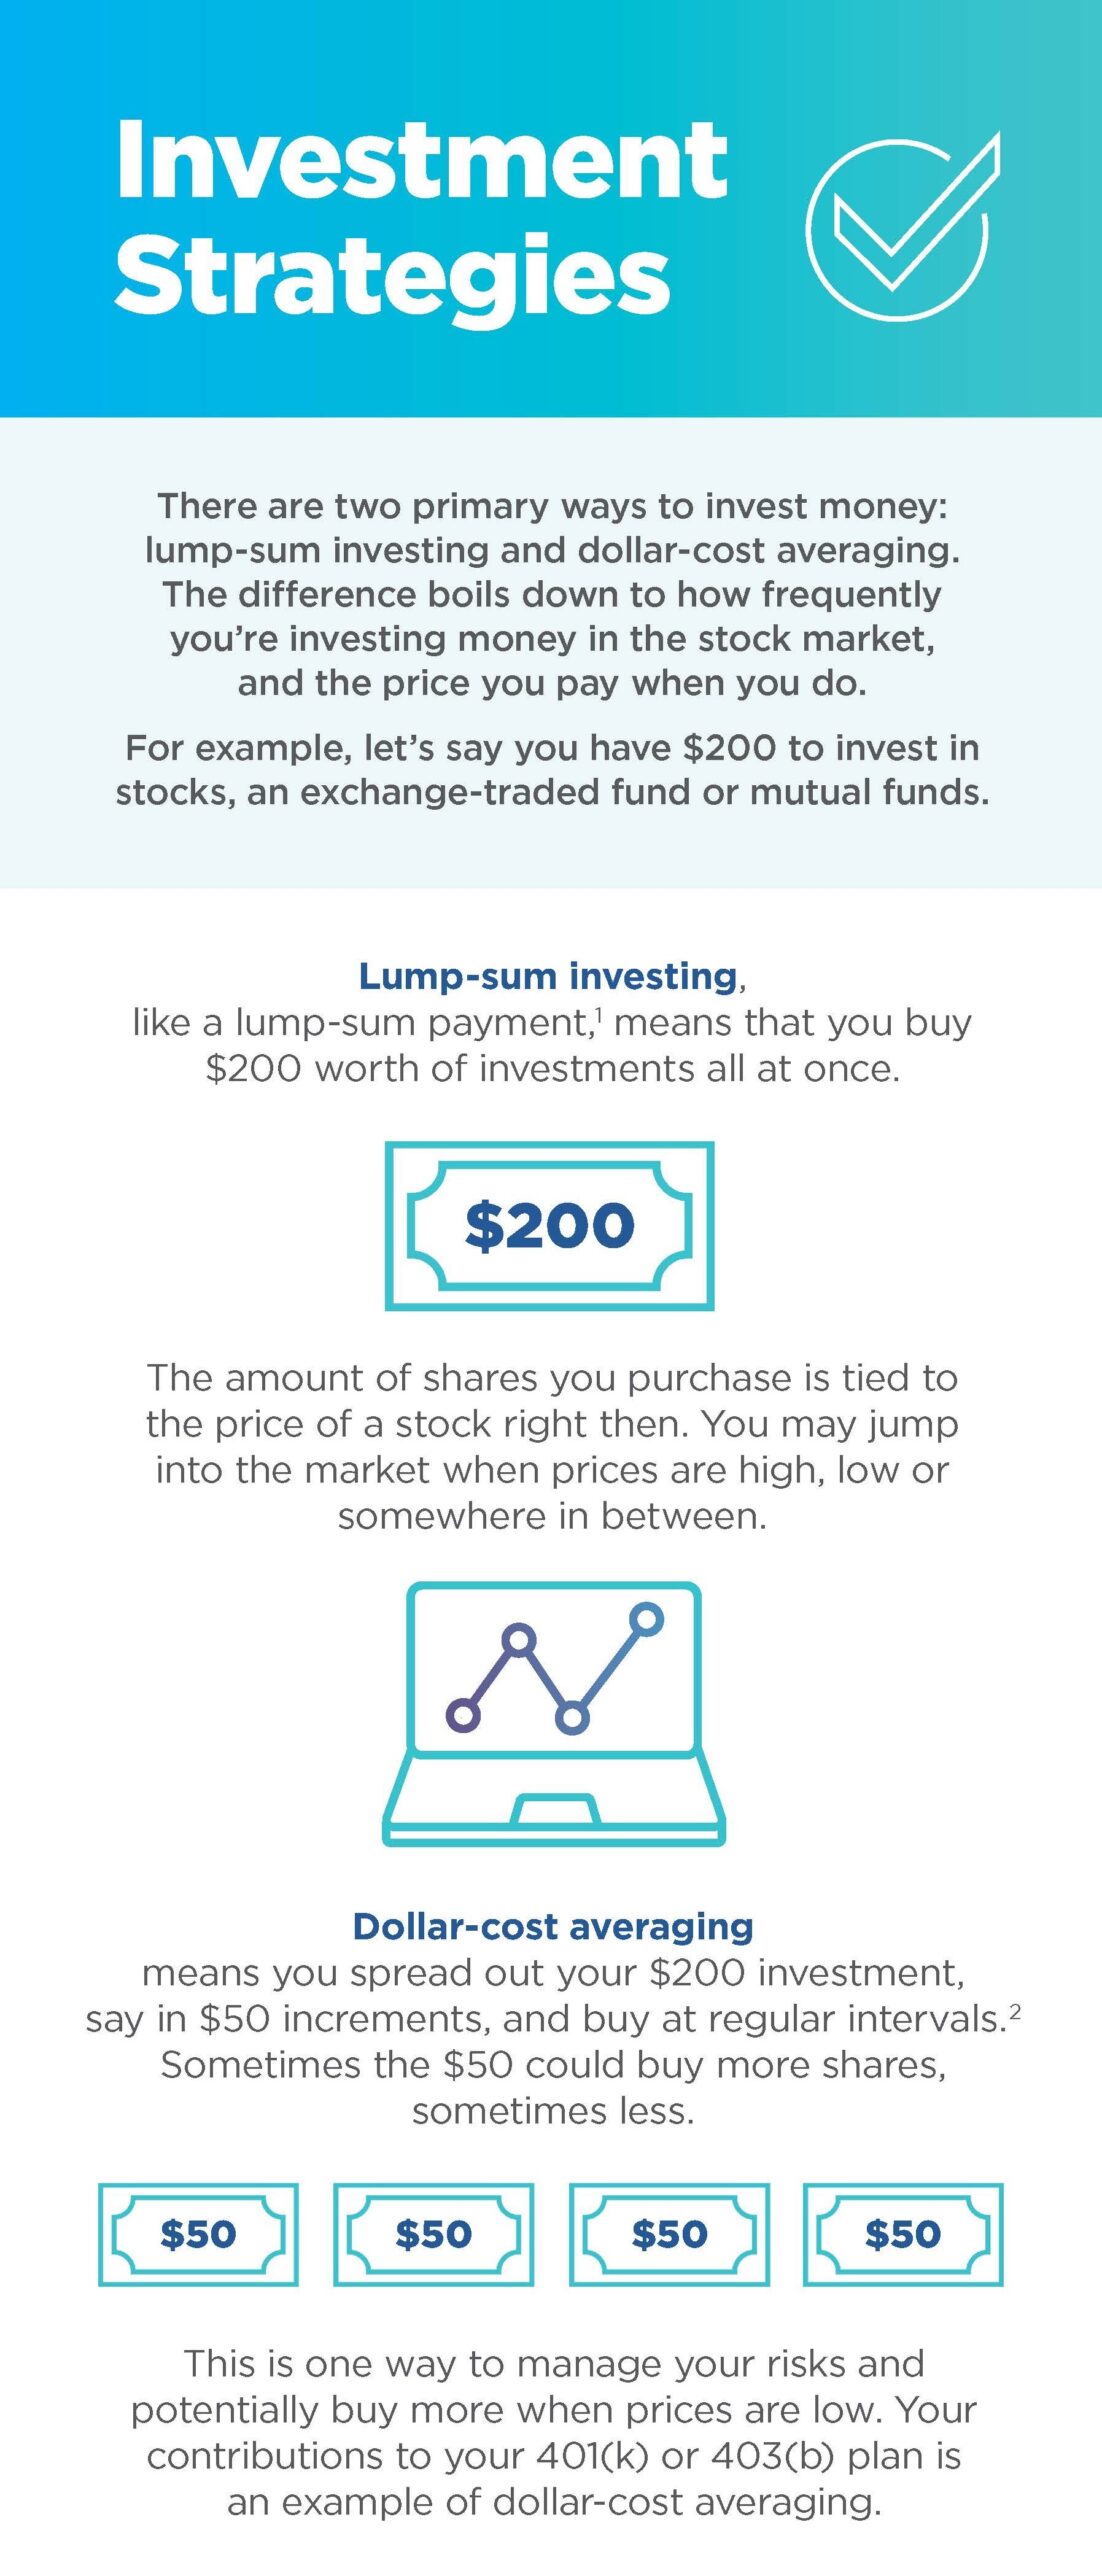 An infographic showing investment strategies including Lump-sum investing and Dollar-cost investing